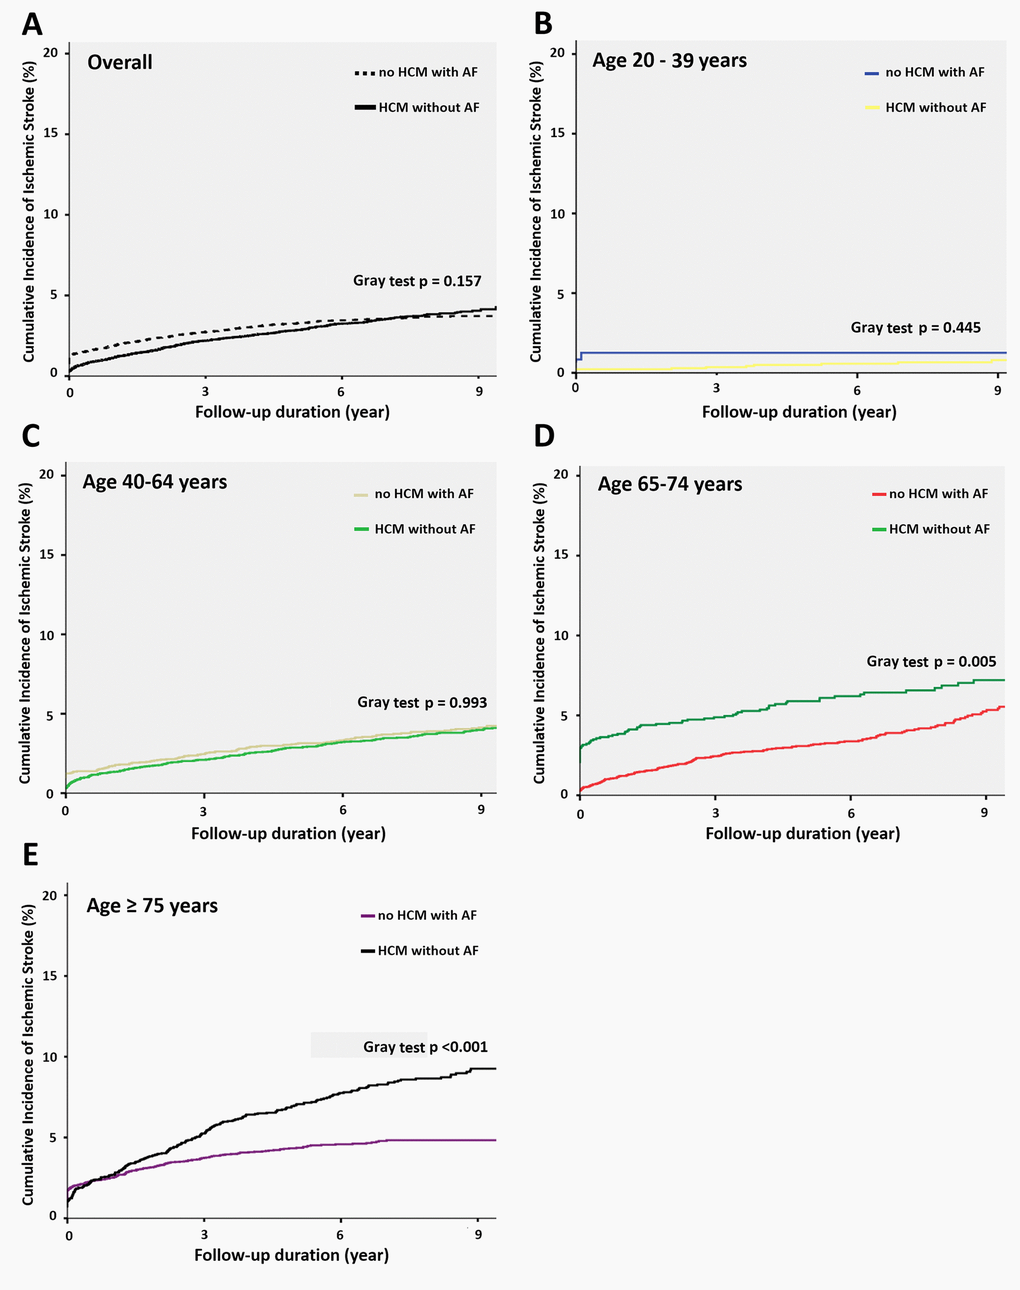 Cumulative incidence function curves for ischemic stroke in different age groups. (A) Survival curve with the Fine and Gray test describing ischemic stroke among patients with HCM without AF and matched general population with AF. The Fine and Gray test showed no significant difference (P = 0.157). (B) Survival curve in the subgroup with age of 20-39 years. The Fine and Gray test showed no significant difference. (p=0.445). (C) Survival curve in the subgroup with age of 40-64 years. The Fine and Gray test showed no significant difference. (p=0.993). (D) Survival curve in the subgroup with age of 65-74 years. The Fine and Gray test showed significant difference. (p=0.005). (E) Survival curve in the subgroup with age above 75 years. The Fine and Gray test showed significant difference. (p 